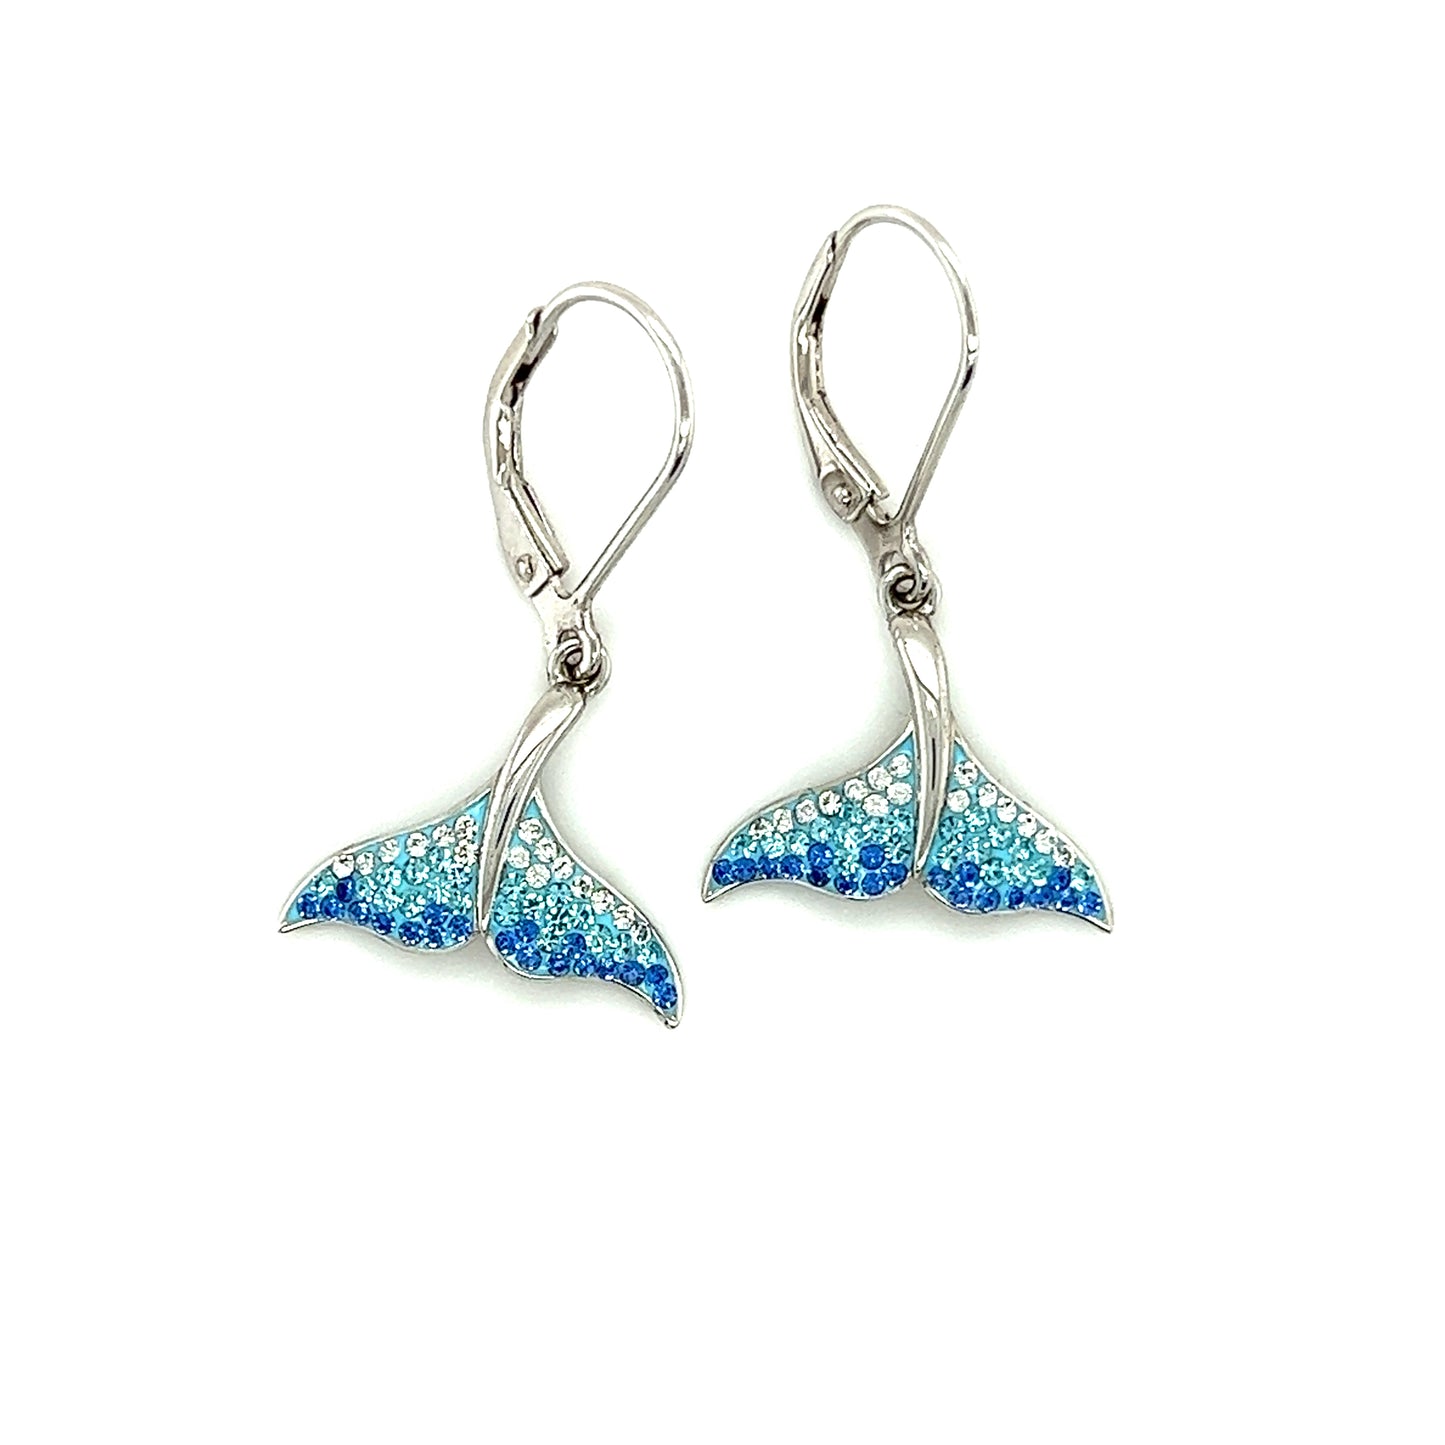 Whale Tail Dangle Earrings with White, Aqua and Blue Crystals in Sterling Silver Alternative View